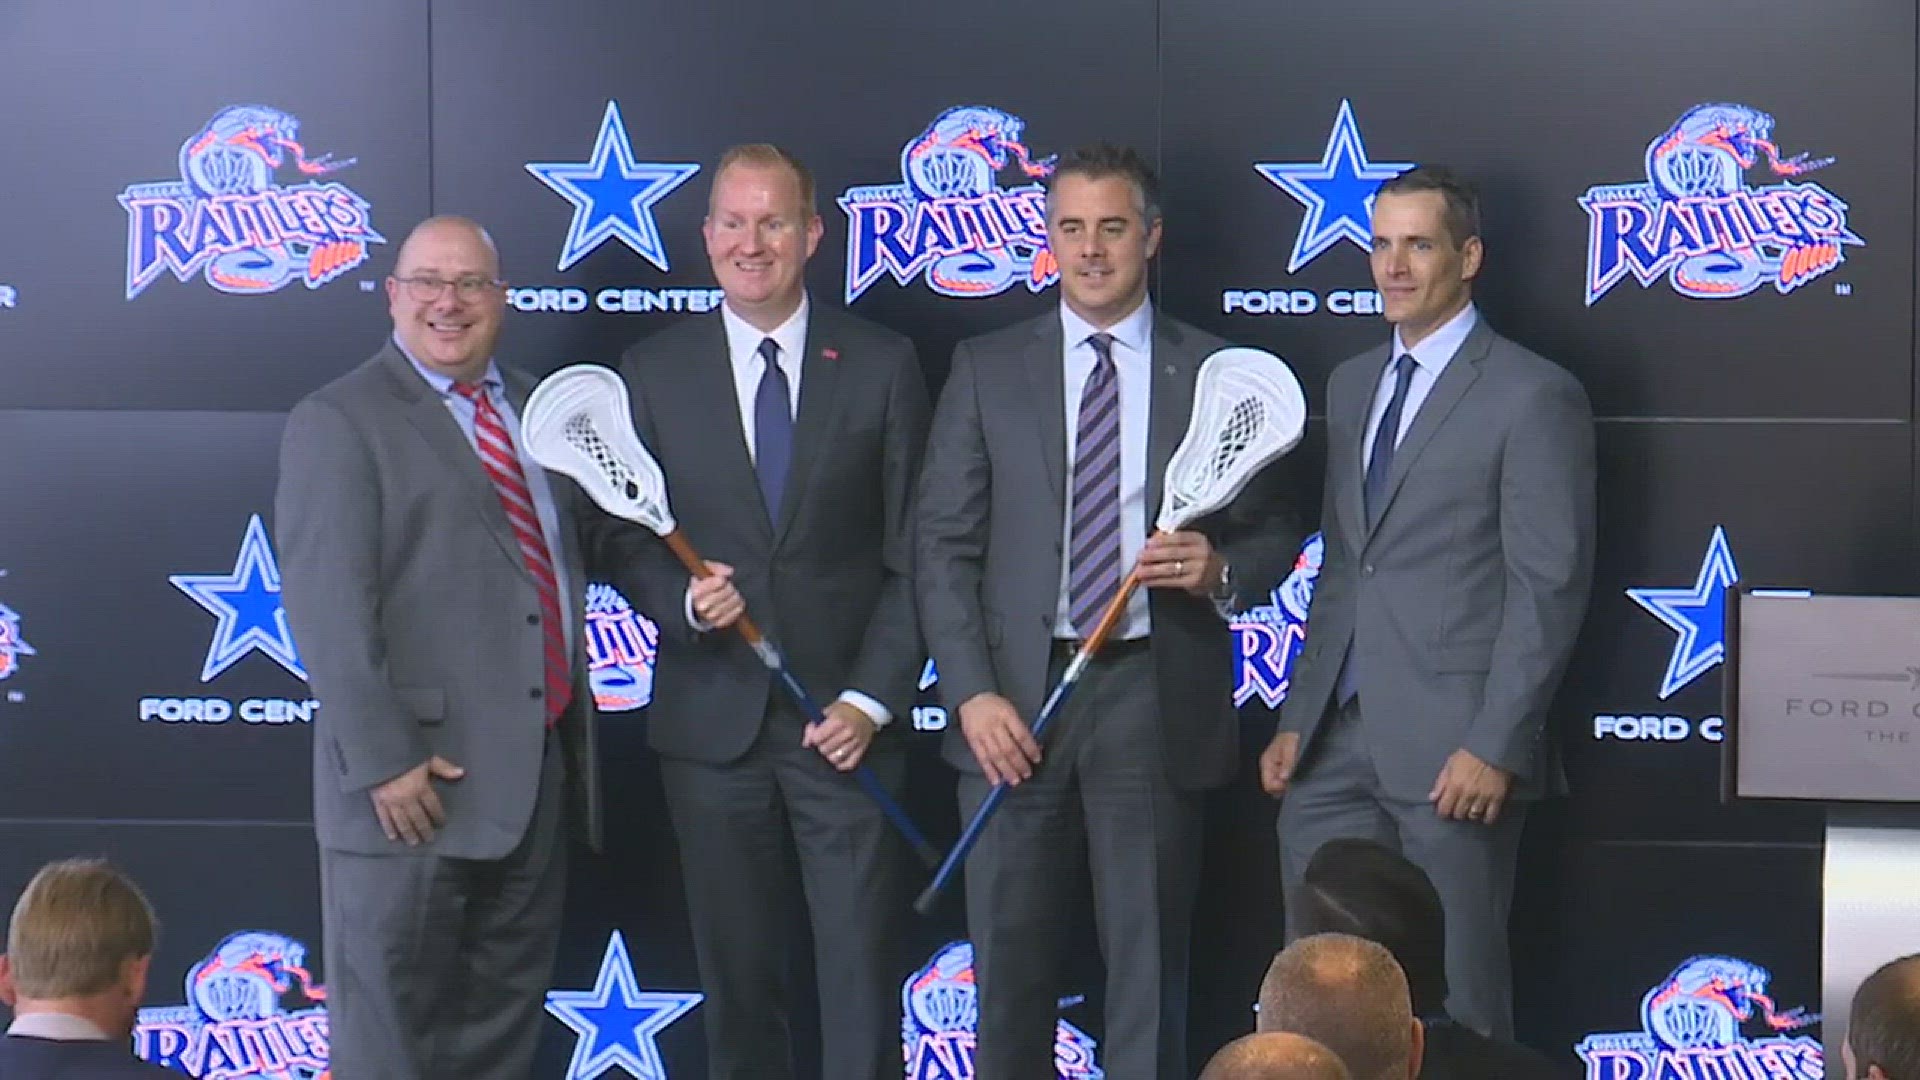 The Dallas Rattlers are the newest professional sports team in North Texas, as Major League Lacrosse is putting a franchise in Frisco. The Rattlers will play their home games at Ford Center, at The Star in Frisco.